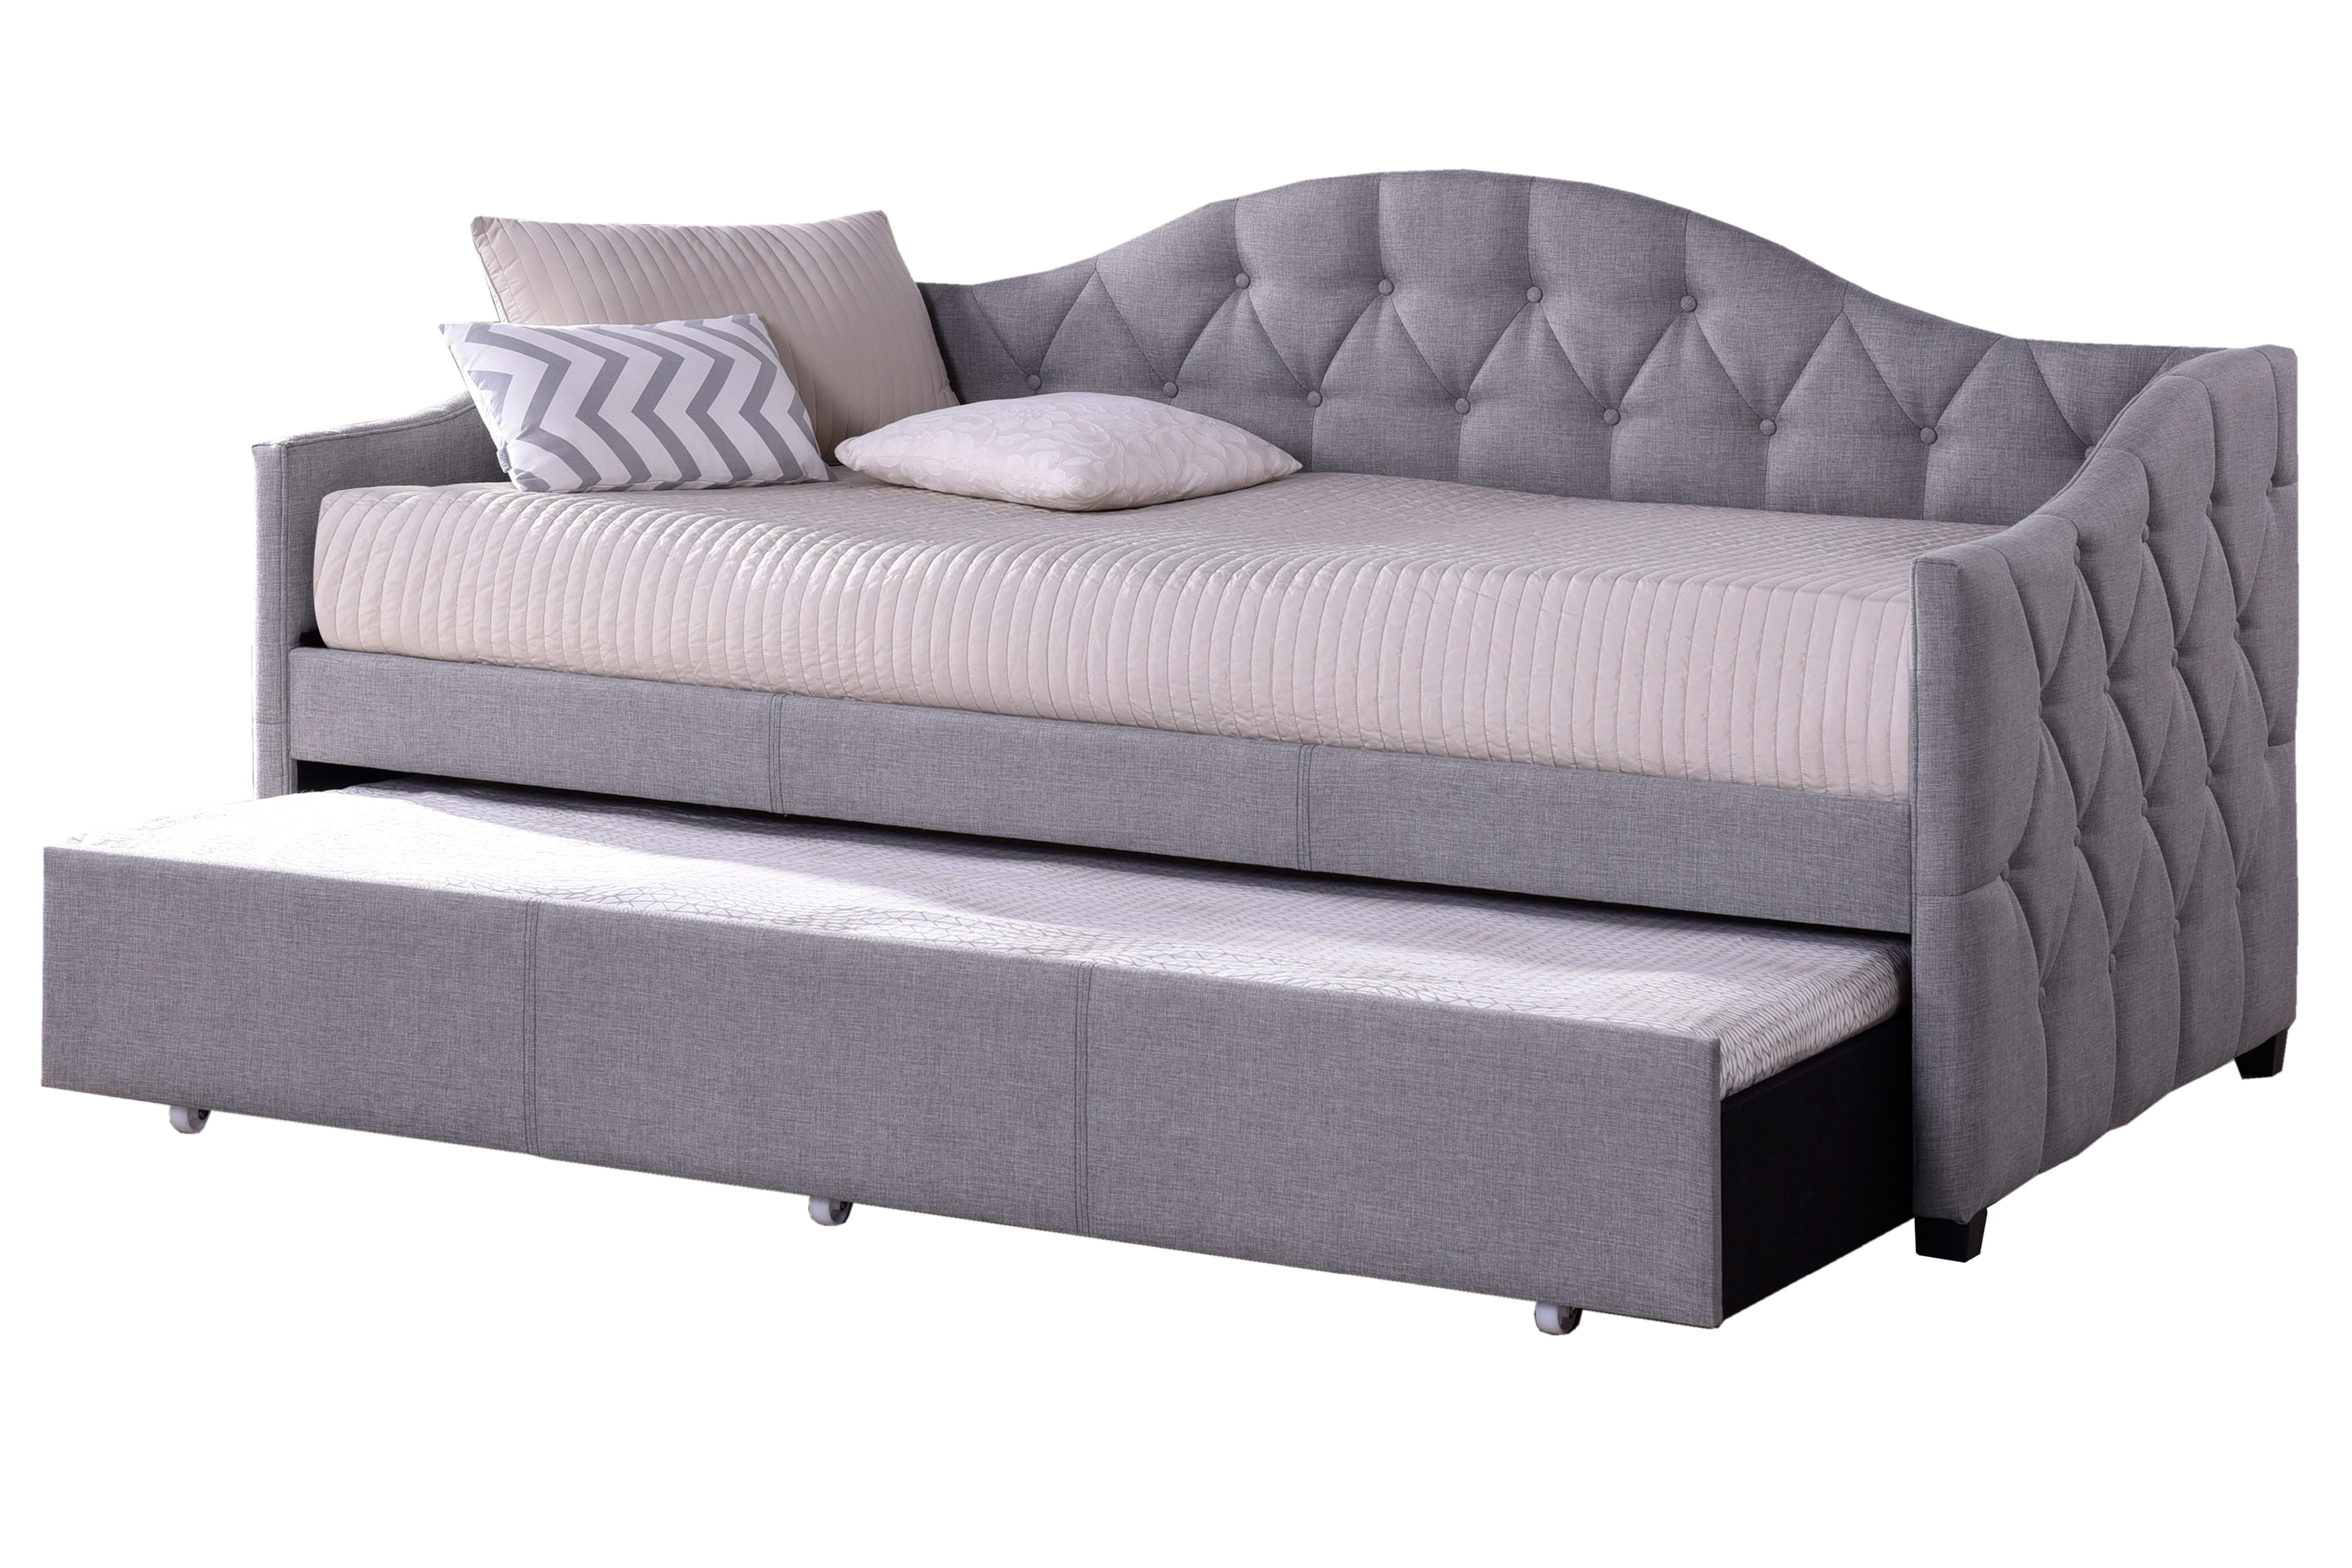 Hillsdale Furniture Jamie Tufted Upholstered Twin Daybed With